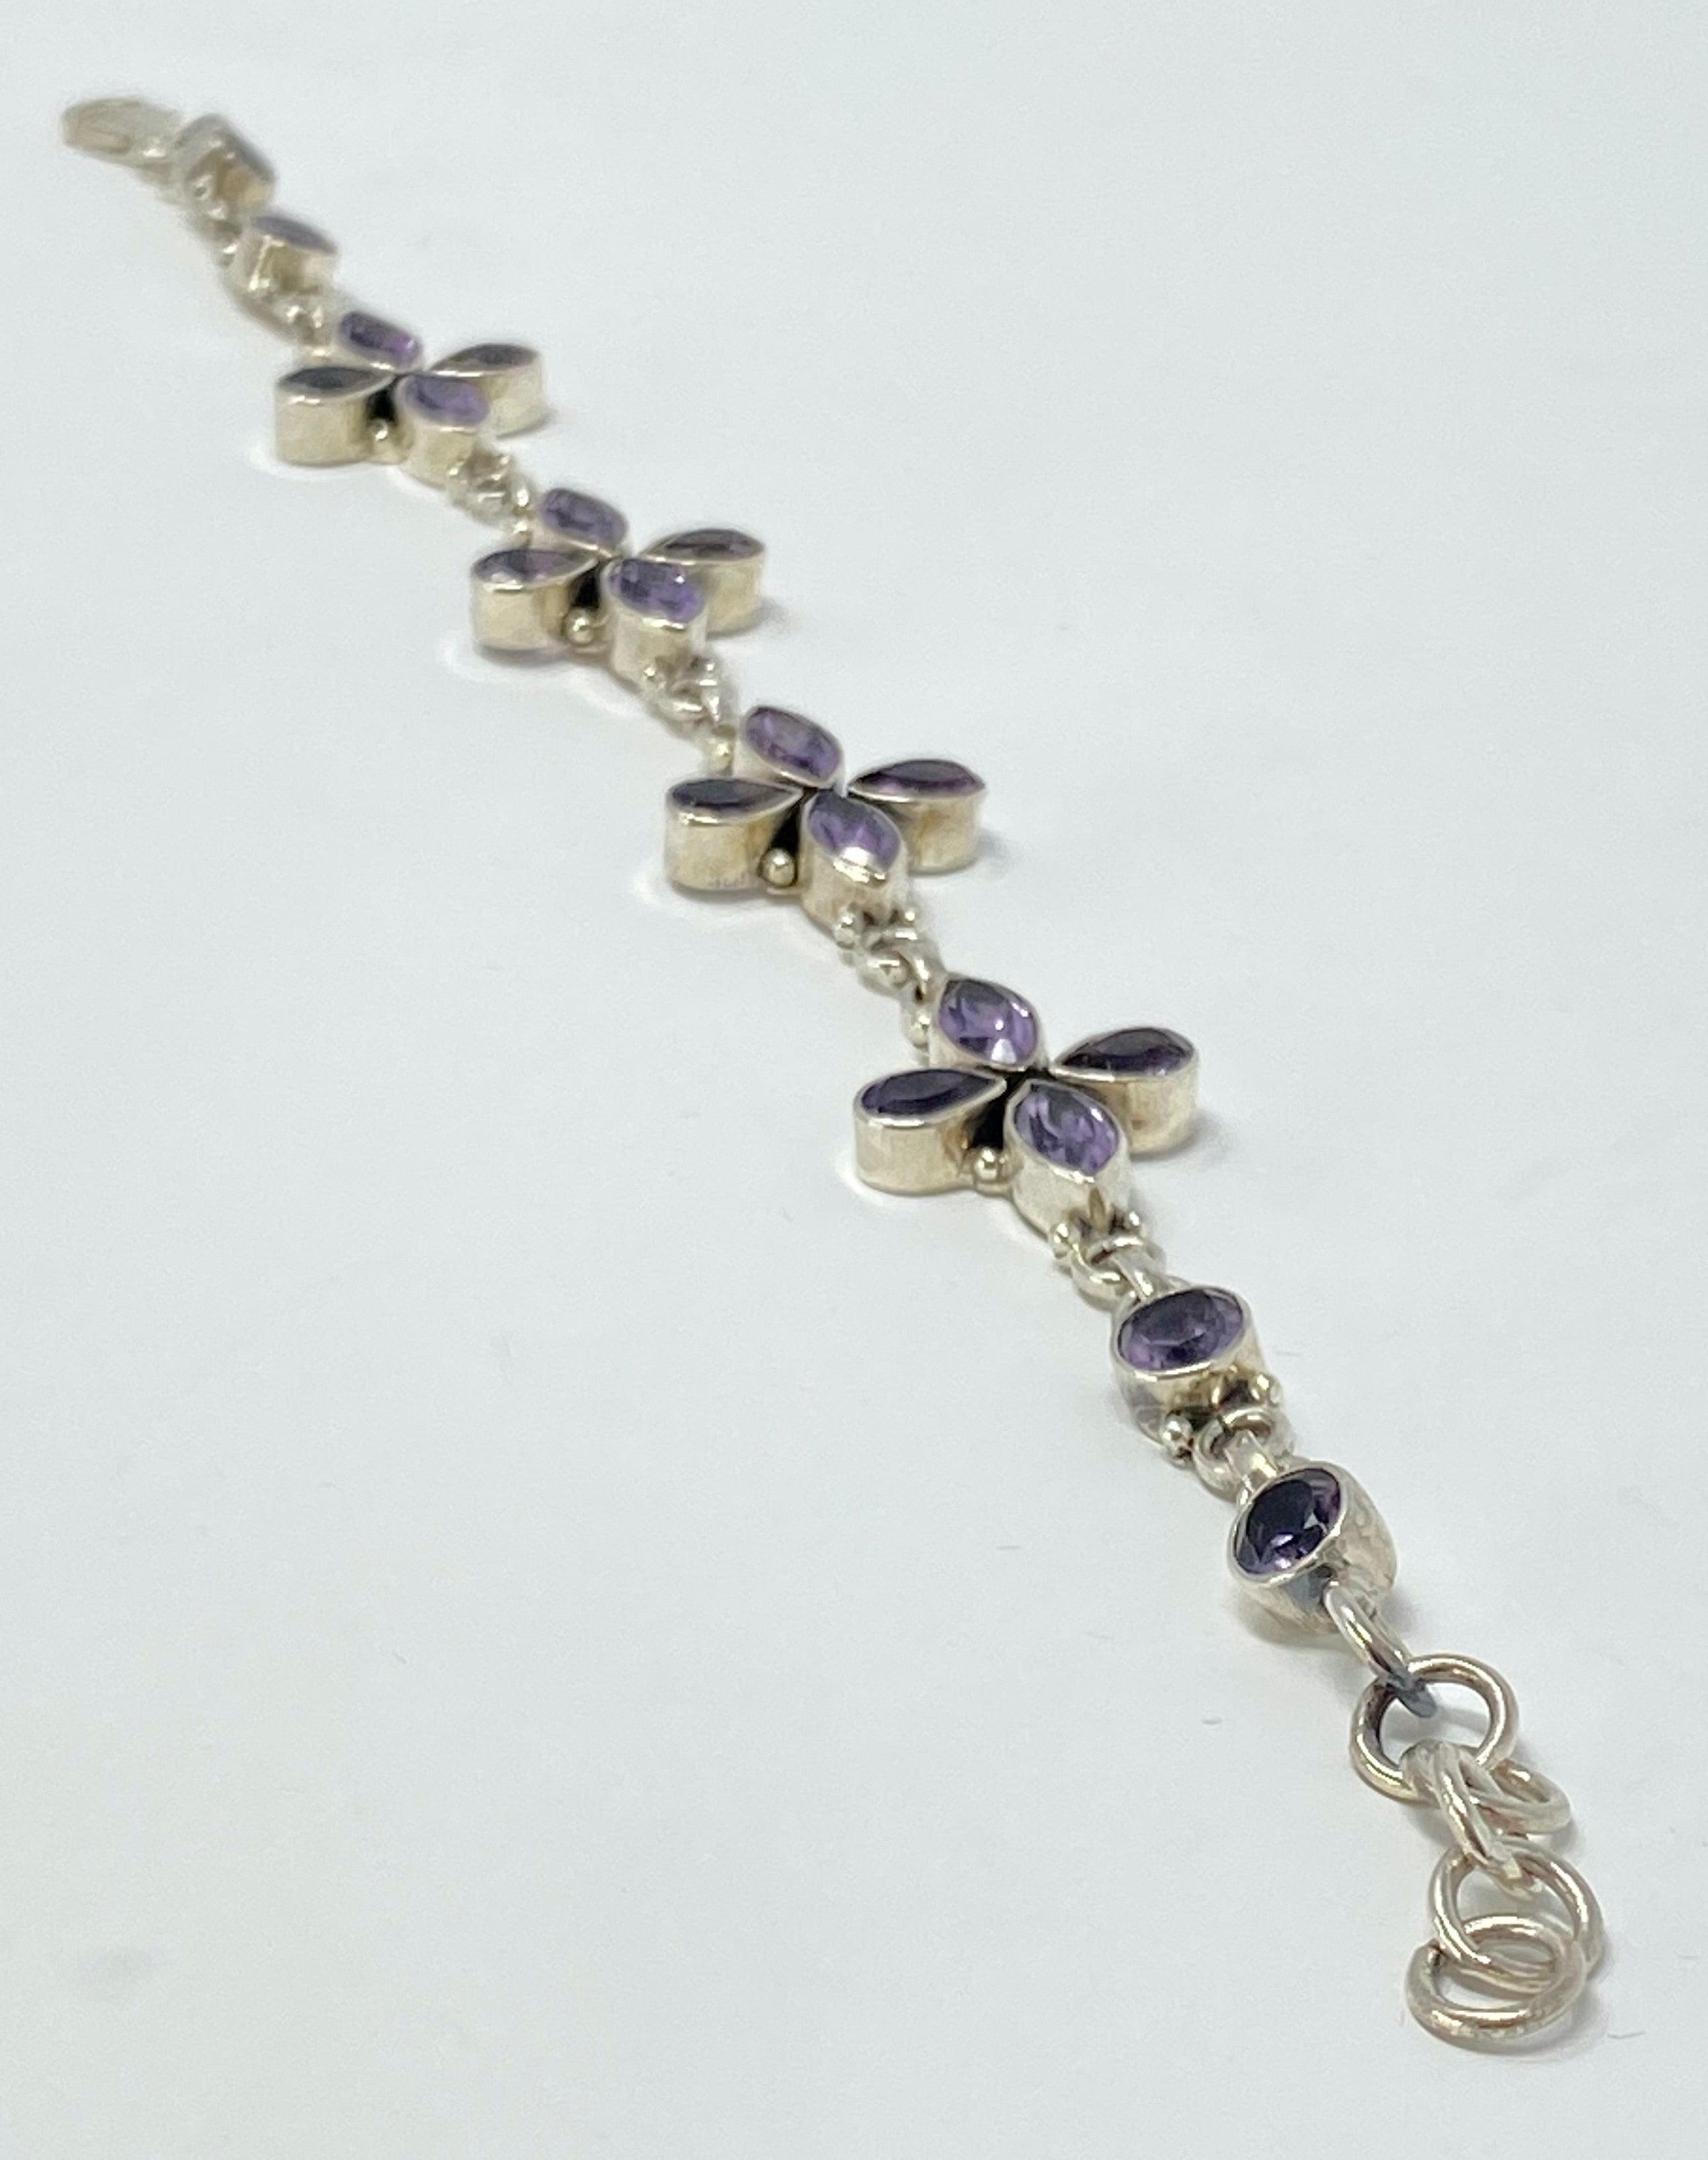 Silver and Amethyst Bracelet